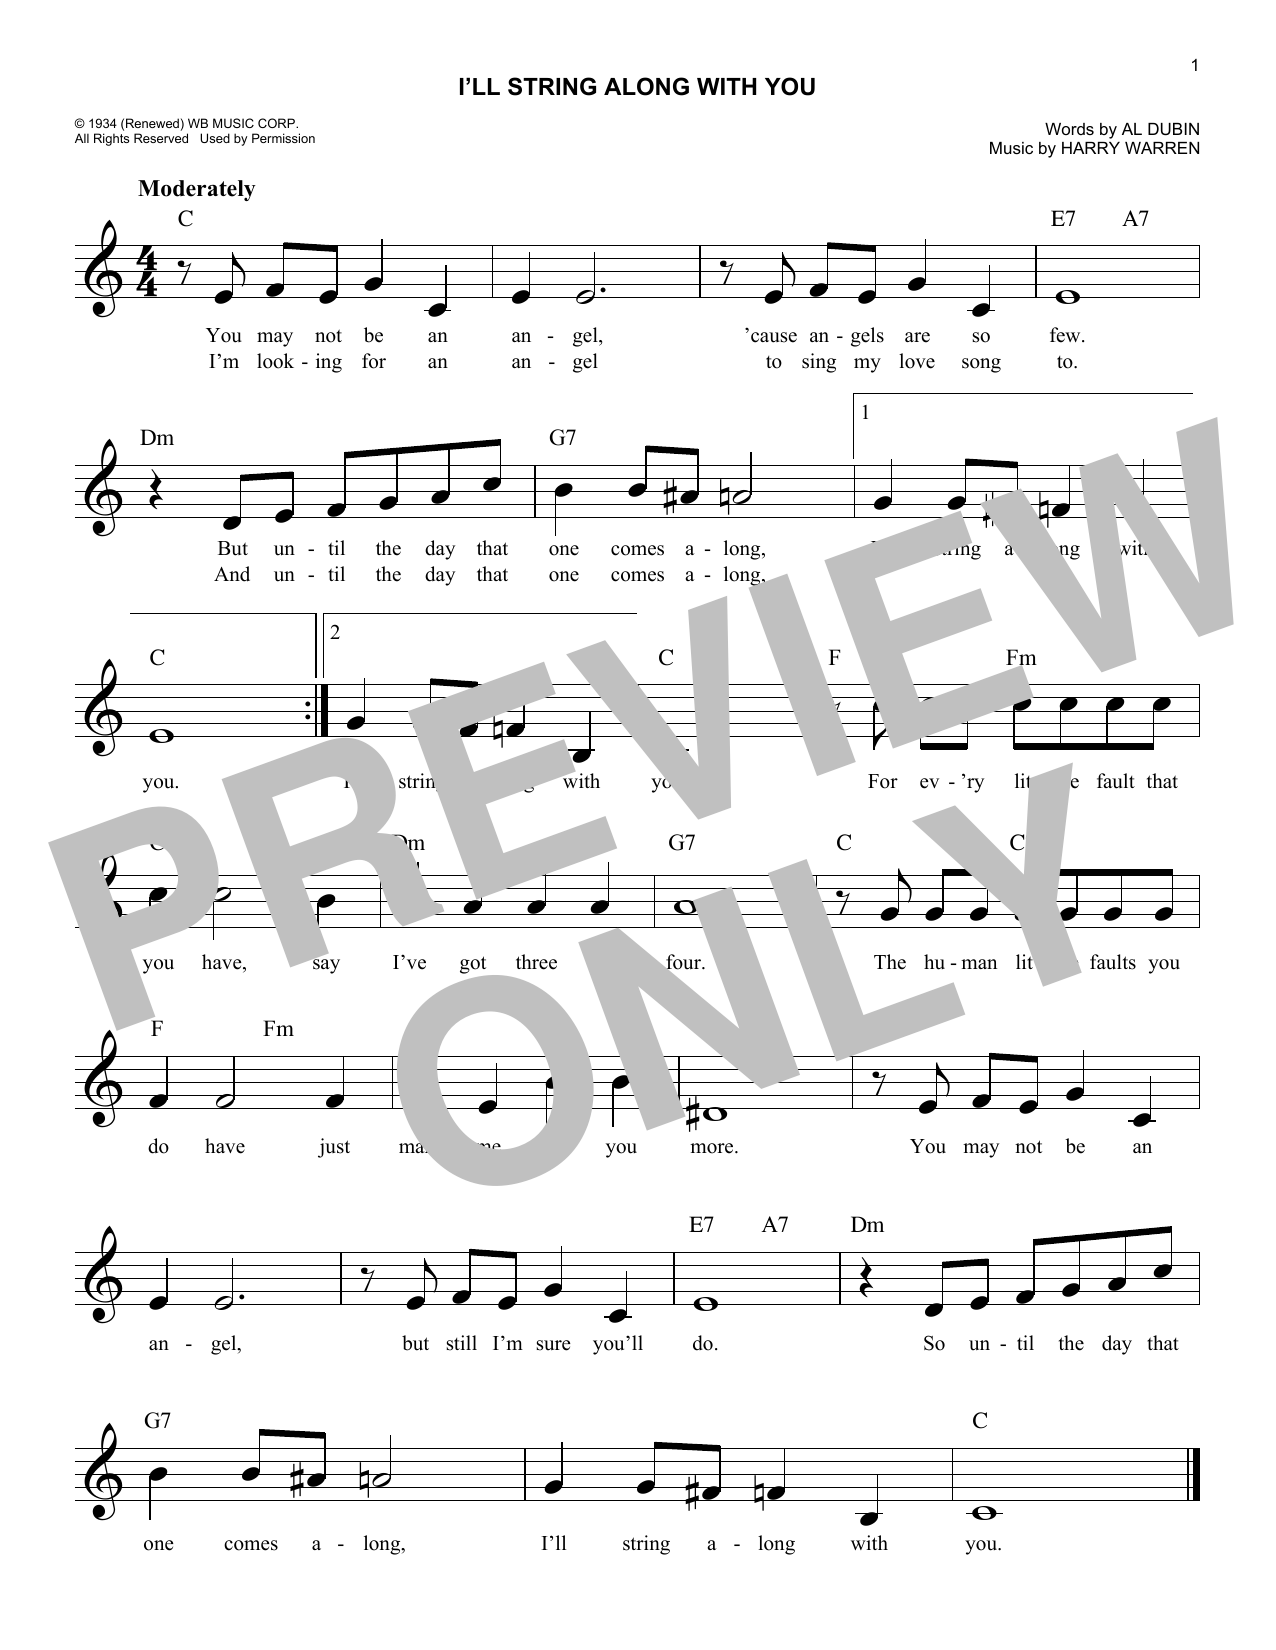 Al Dubin I'll String Along With You sheet music notes and chords. Download Printable PDF.